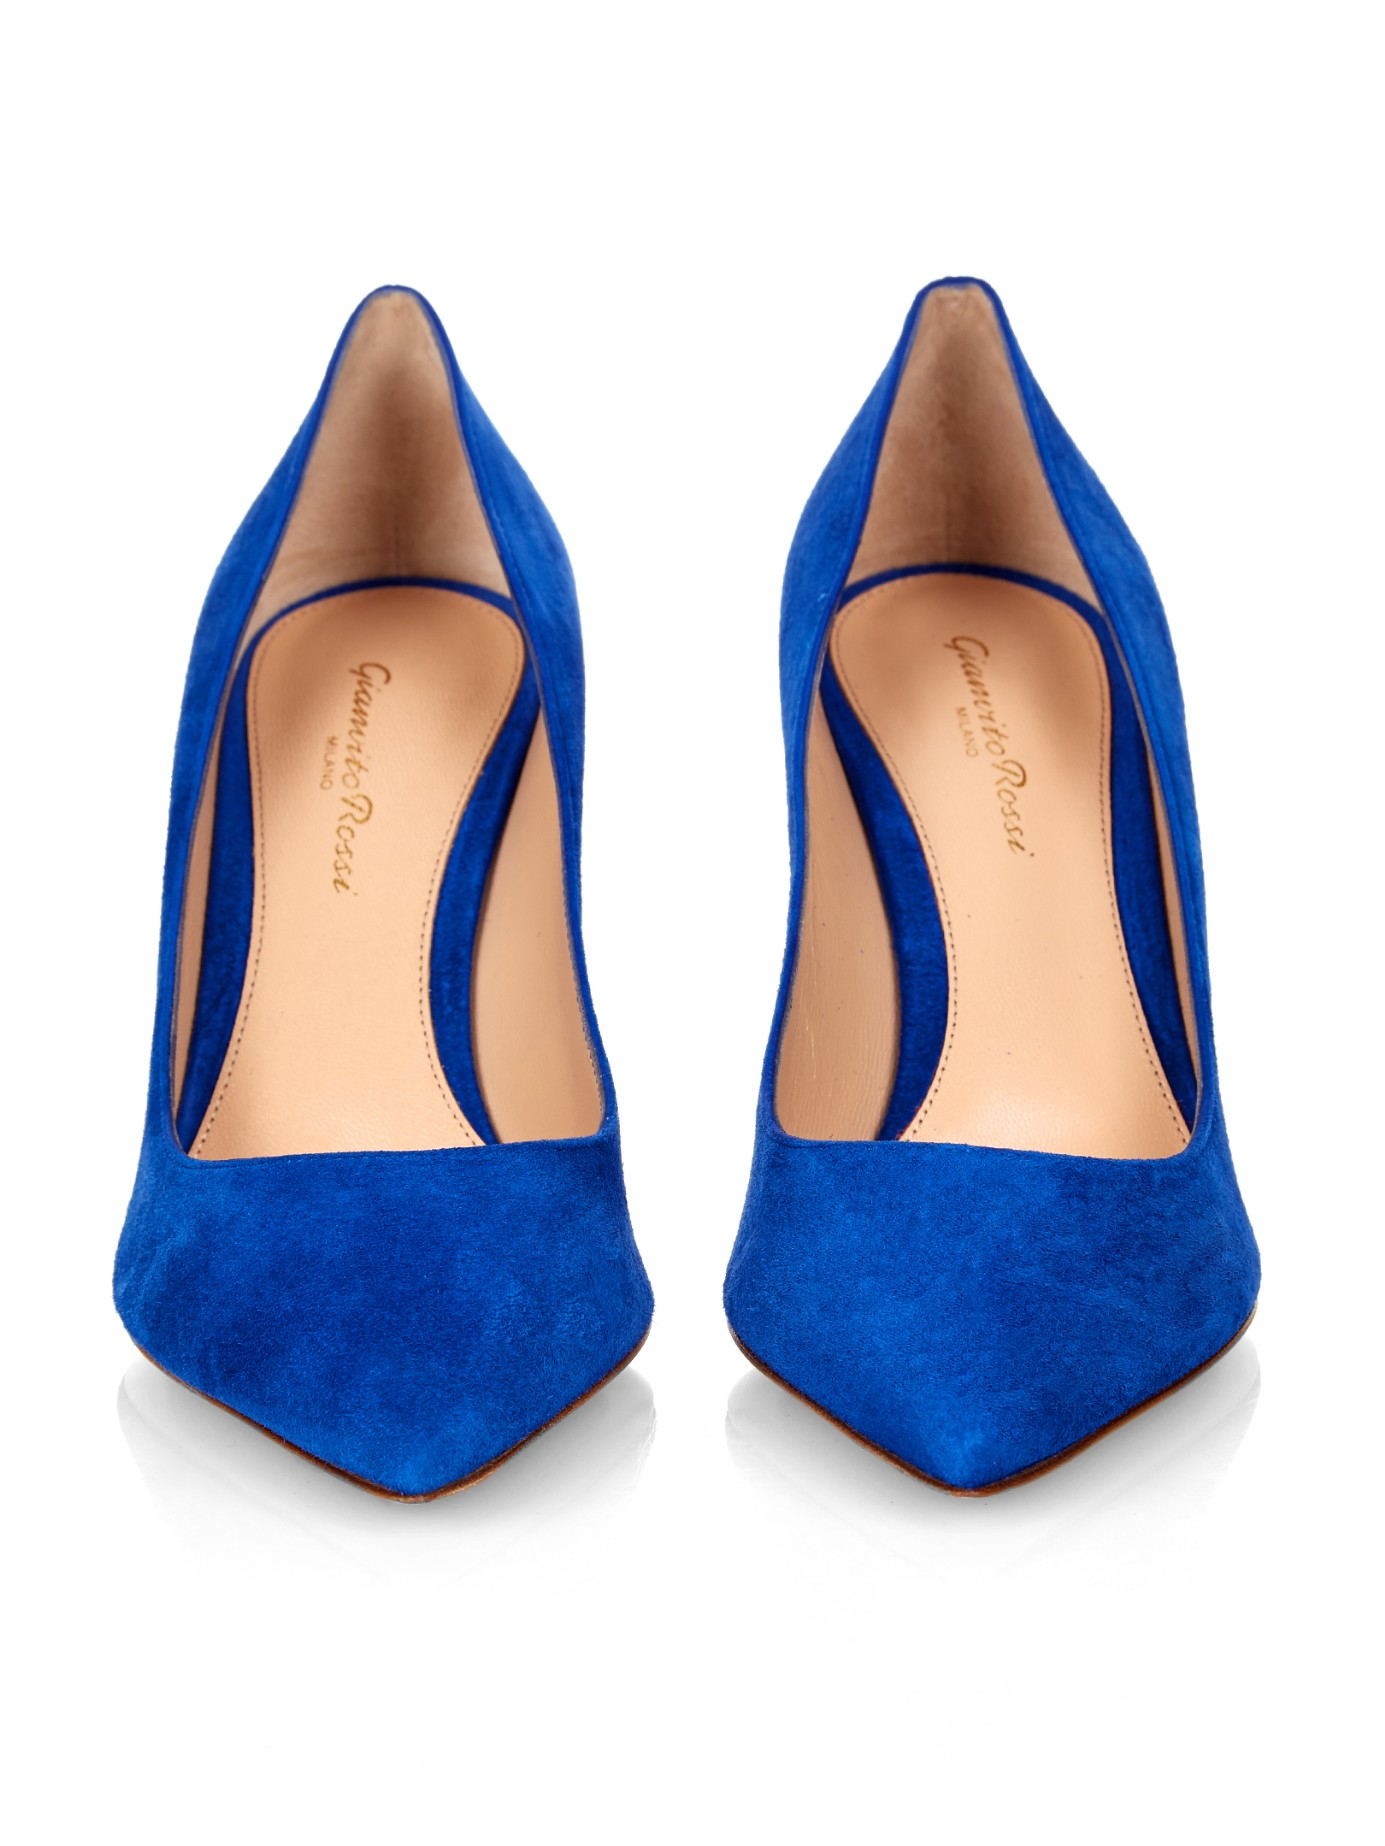 Lyst - Gianvito Rossi Business Suede Pumps in Blue